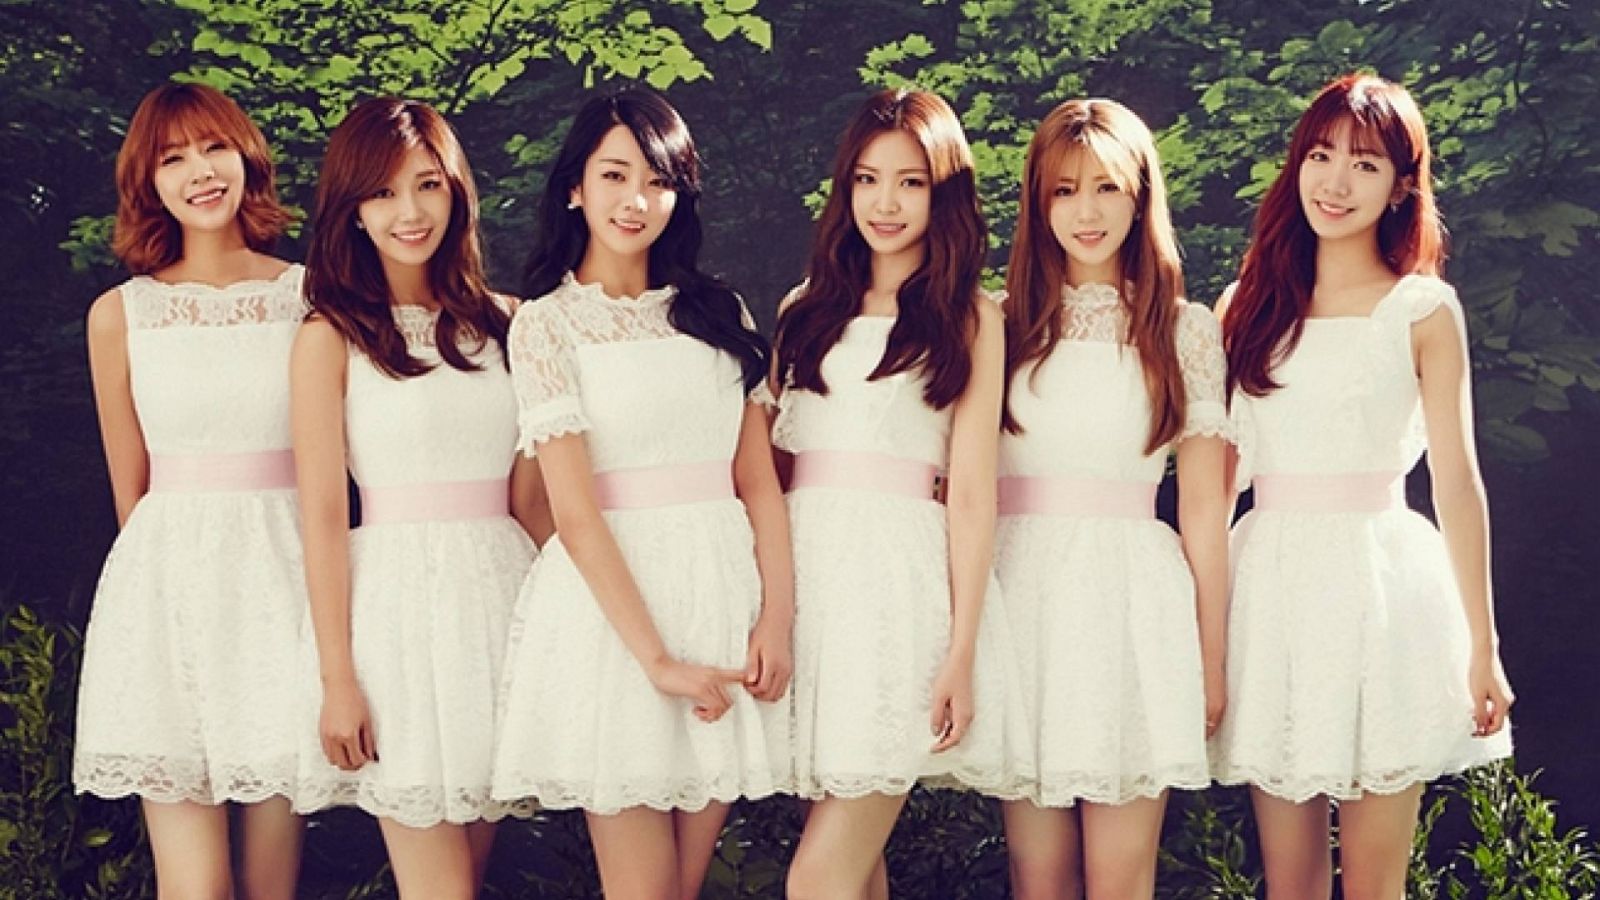 Neue Single von Apink © Apink. All Rights Reserved.